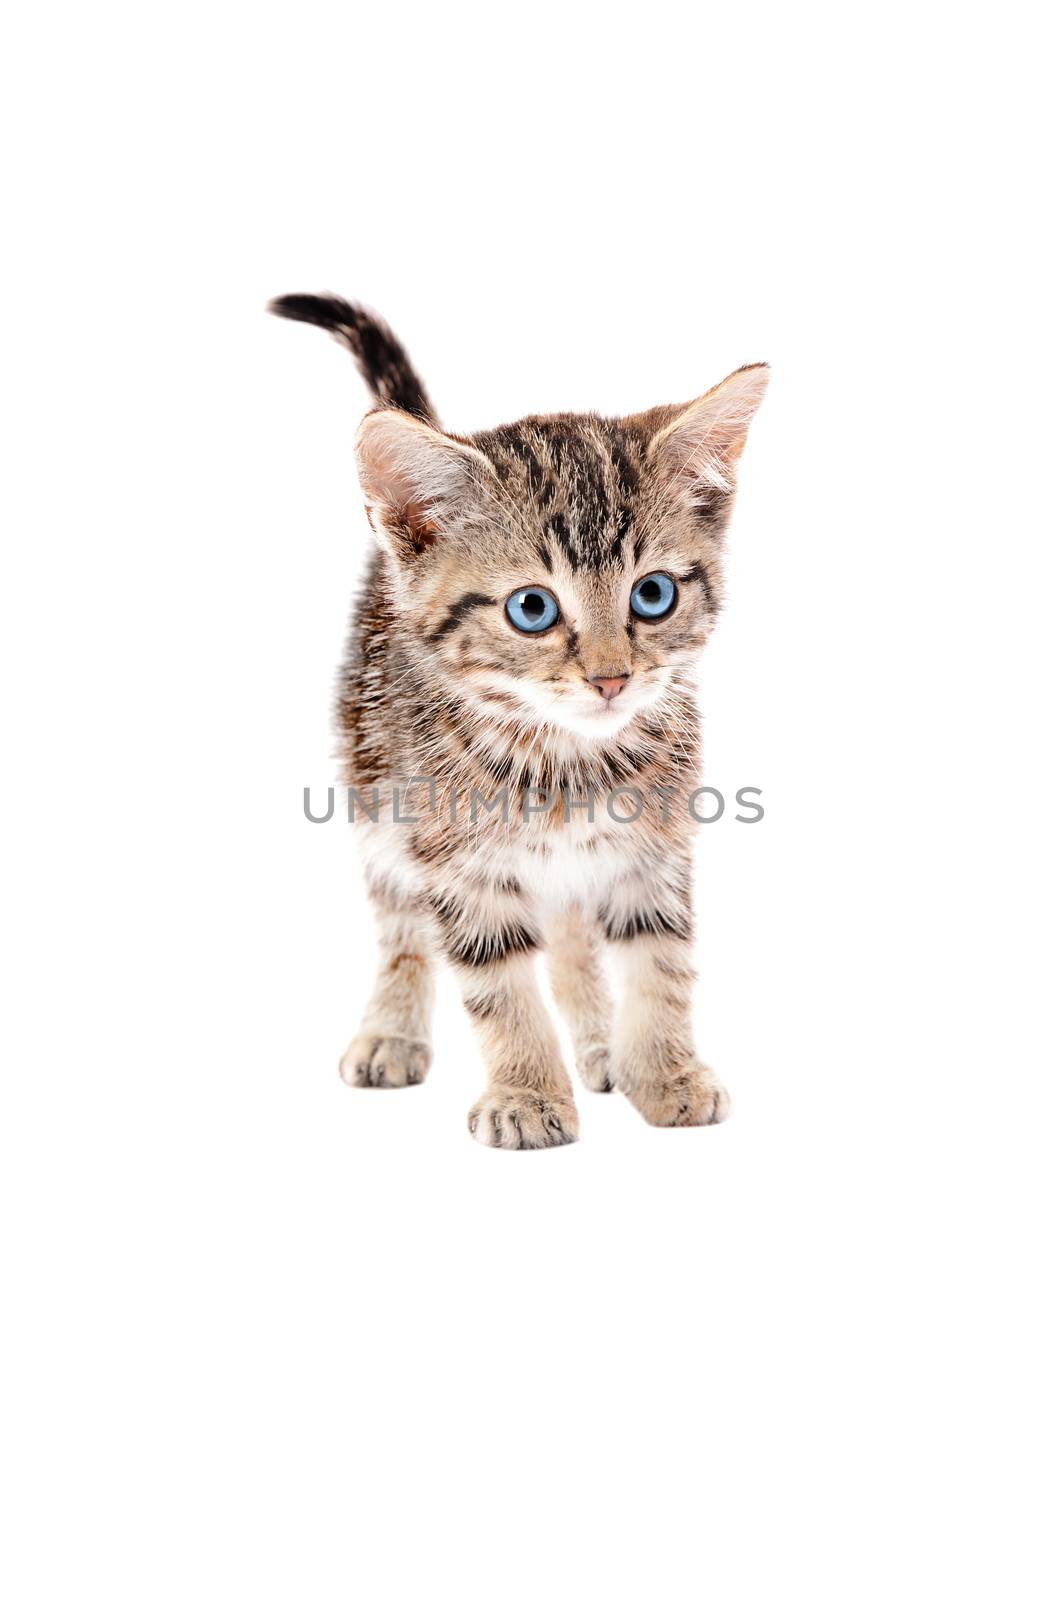 Cute striped cat standing with tail erect